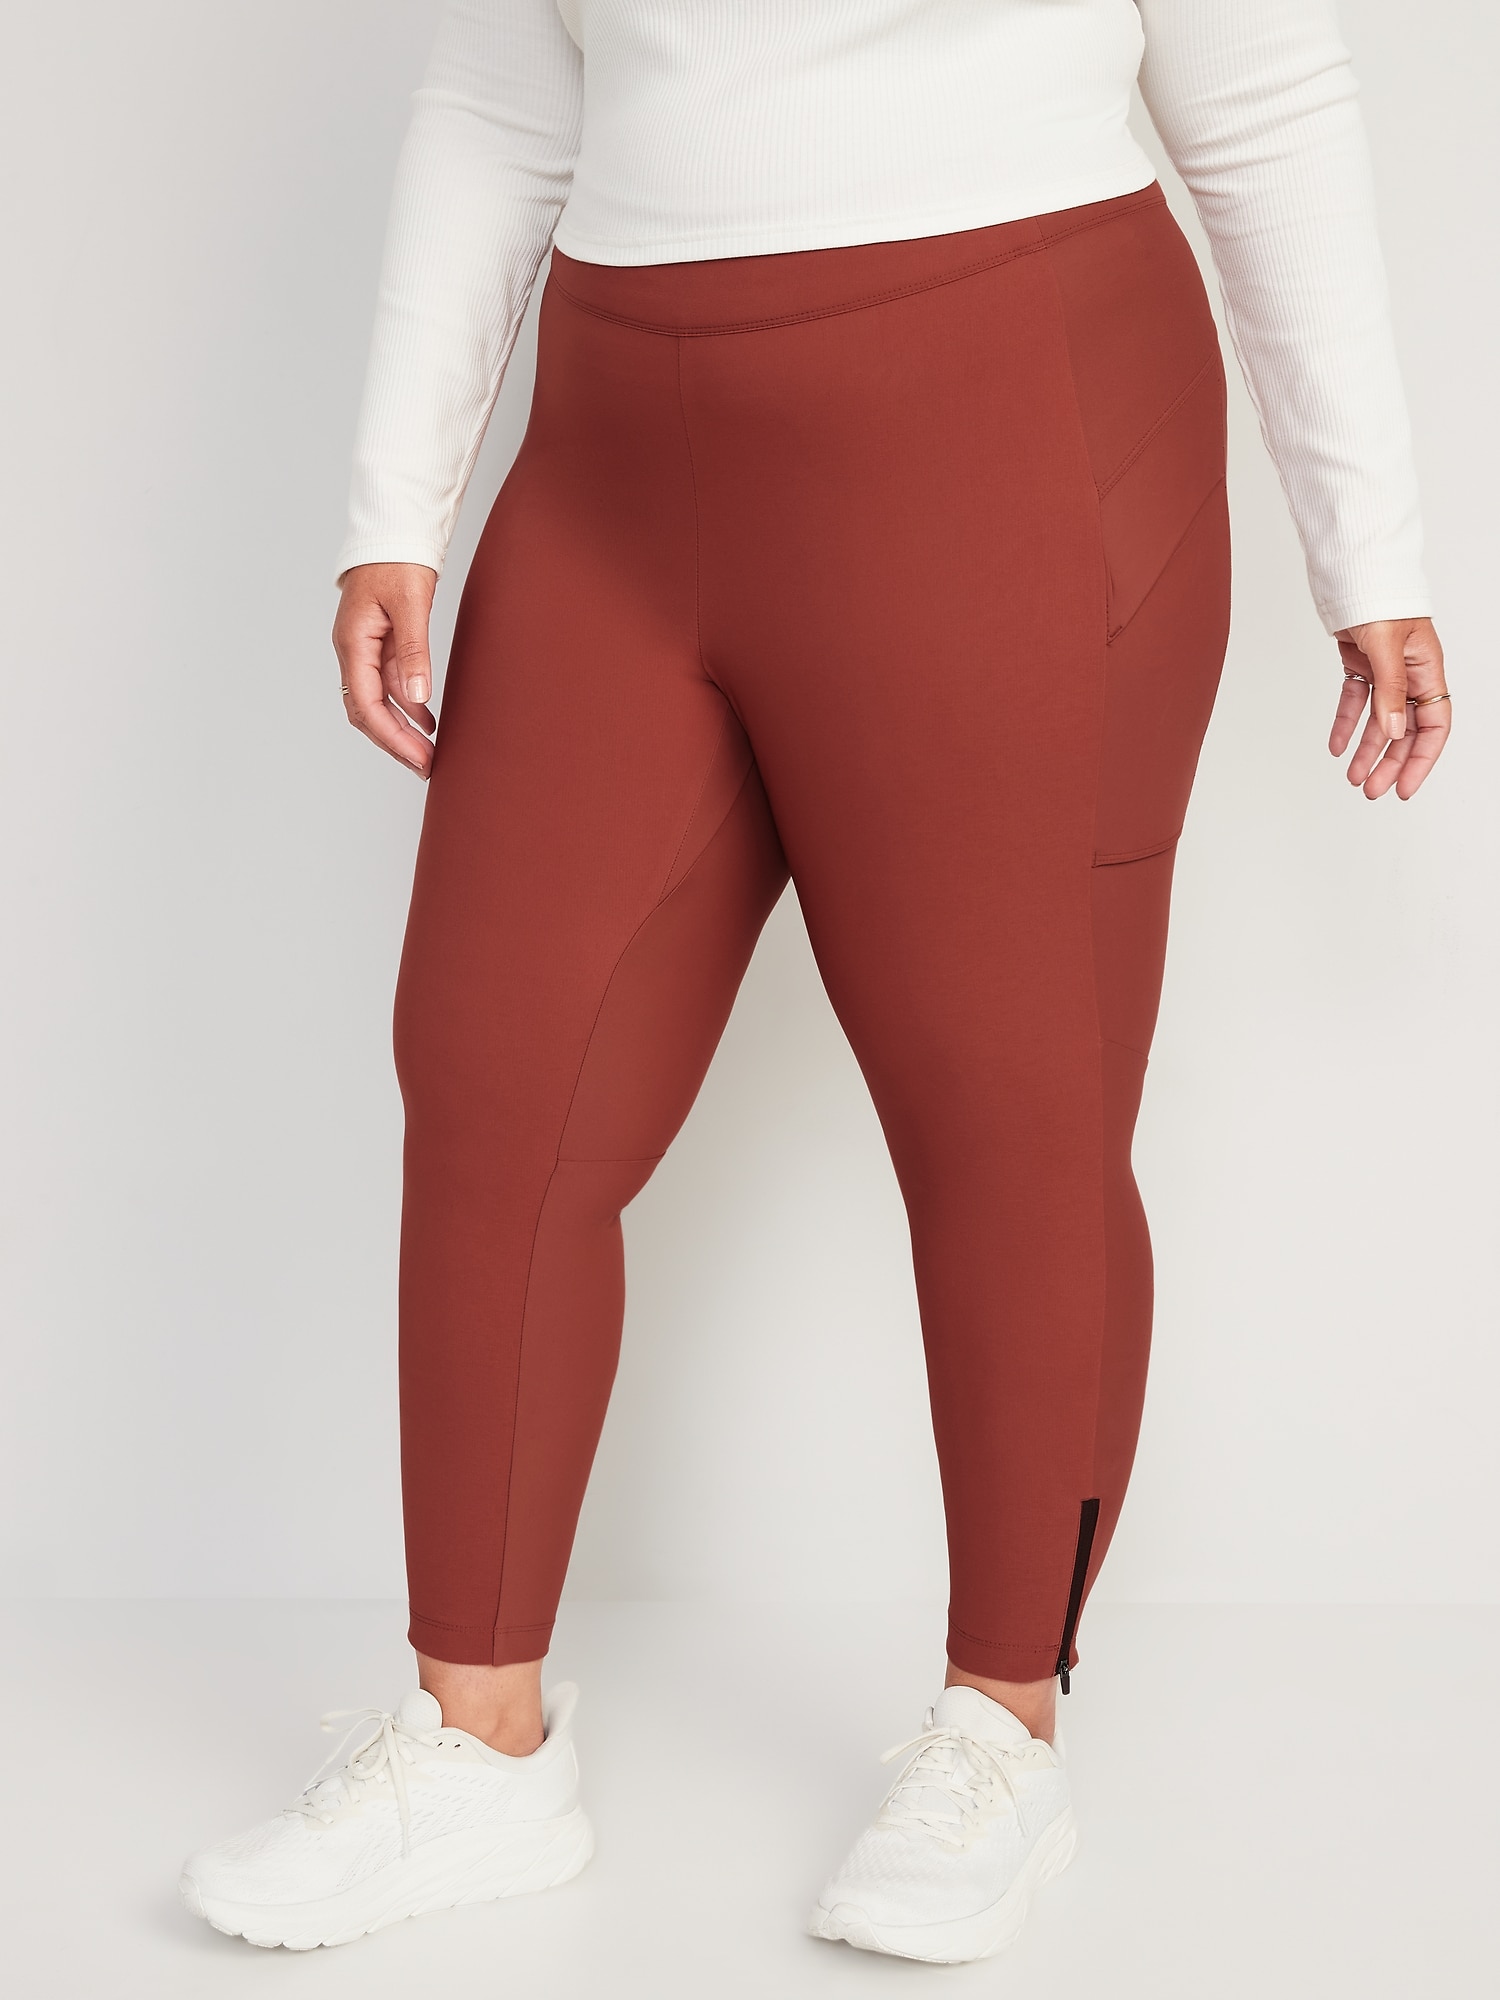 High-Waisted All-Seasons StretchTech 7/8 Hybrid Ankle Pants